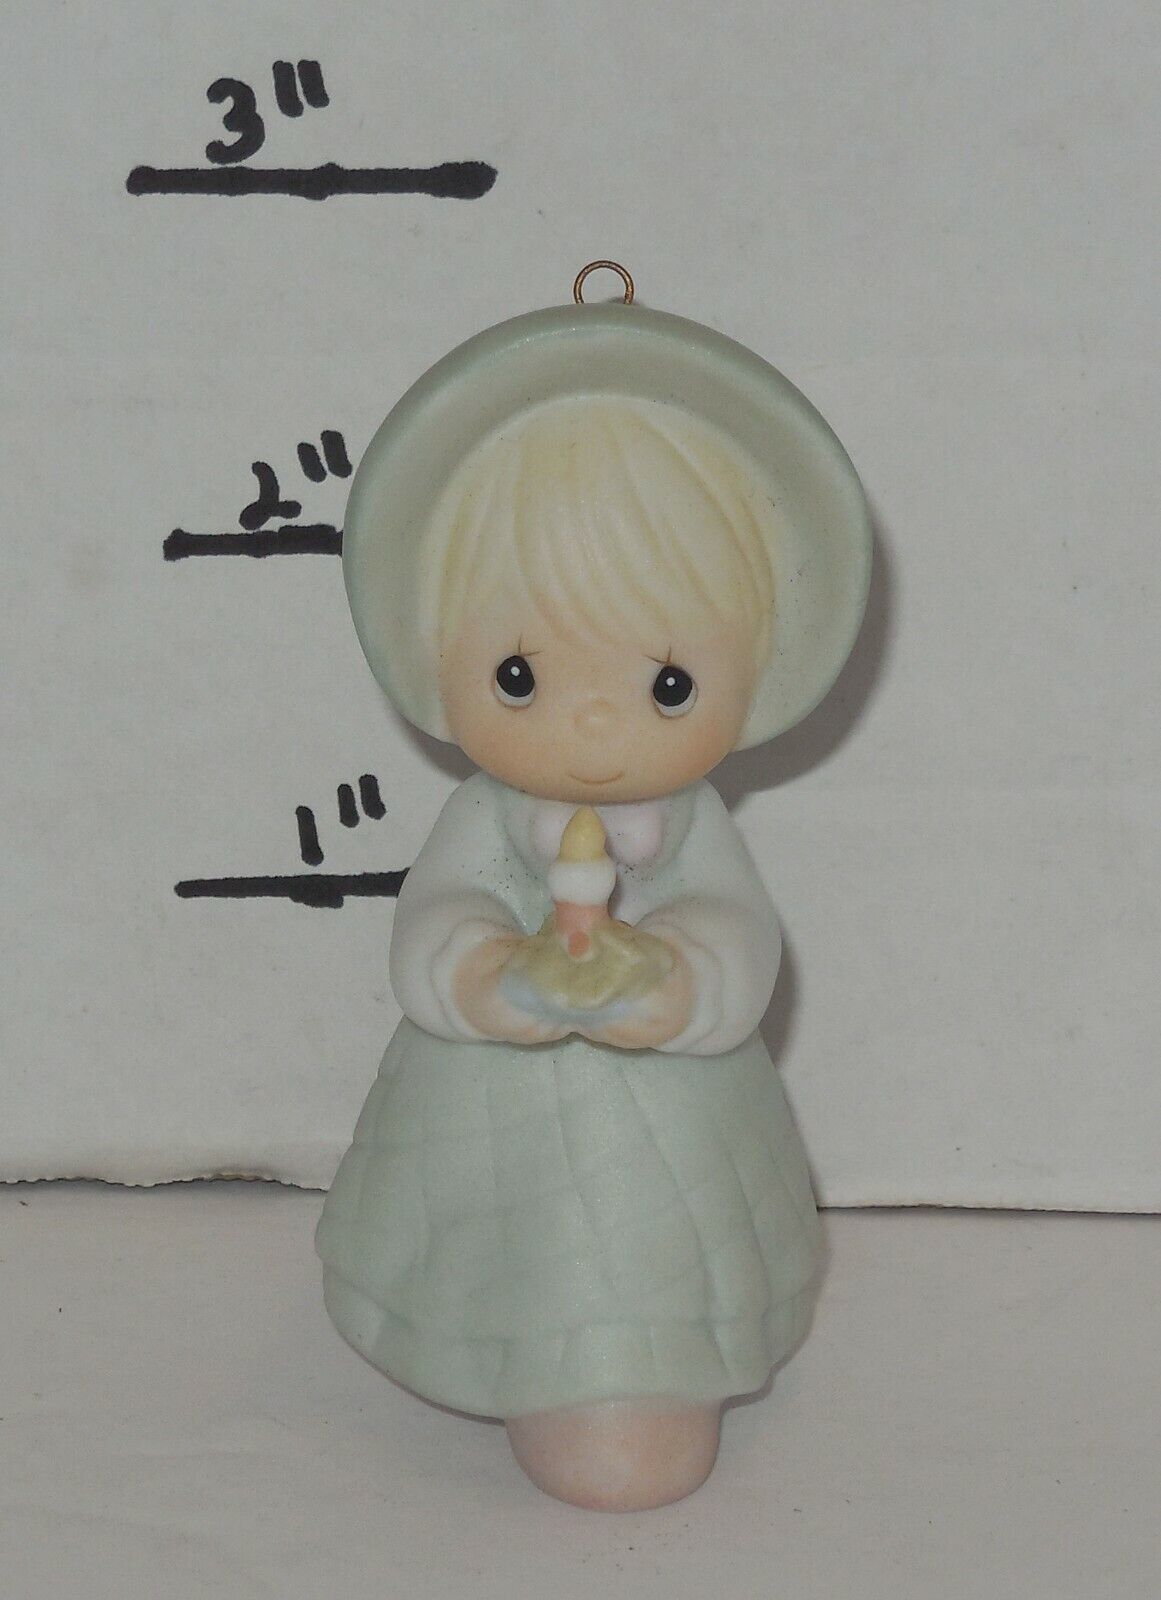 1993 Precious Moments #527211 Share In The Warmth of Christmas Girl Ornament HTF - $24.04